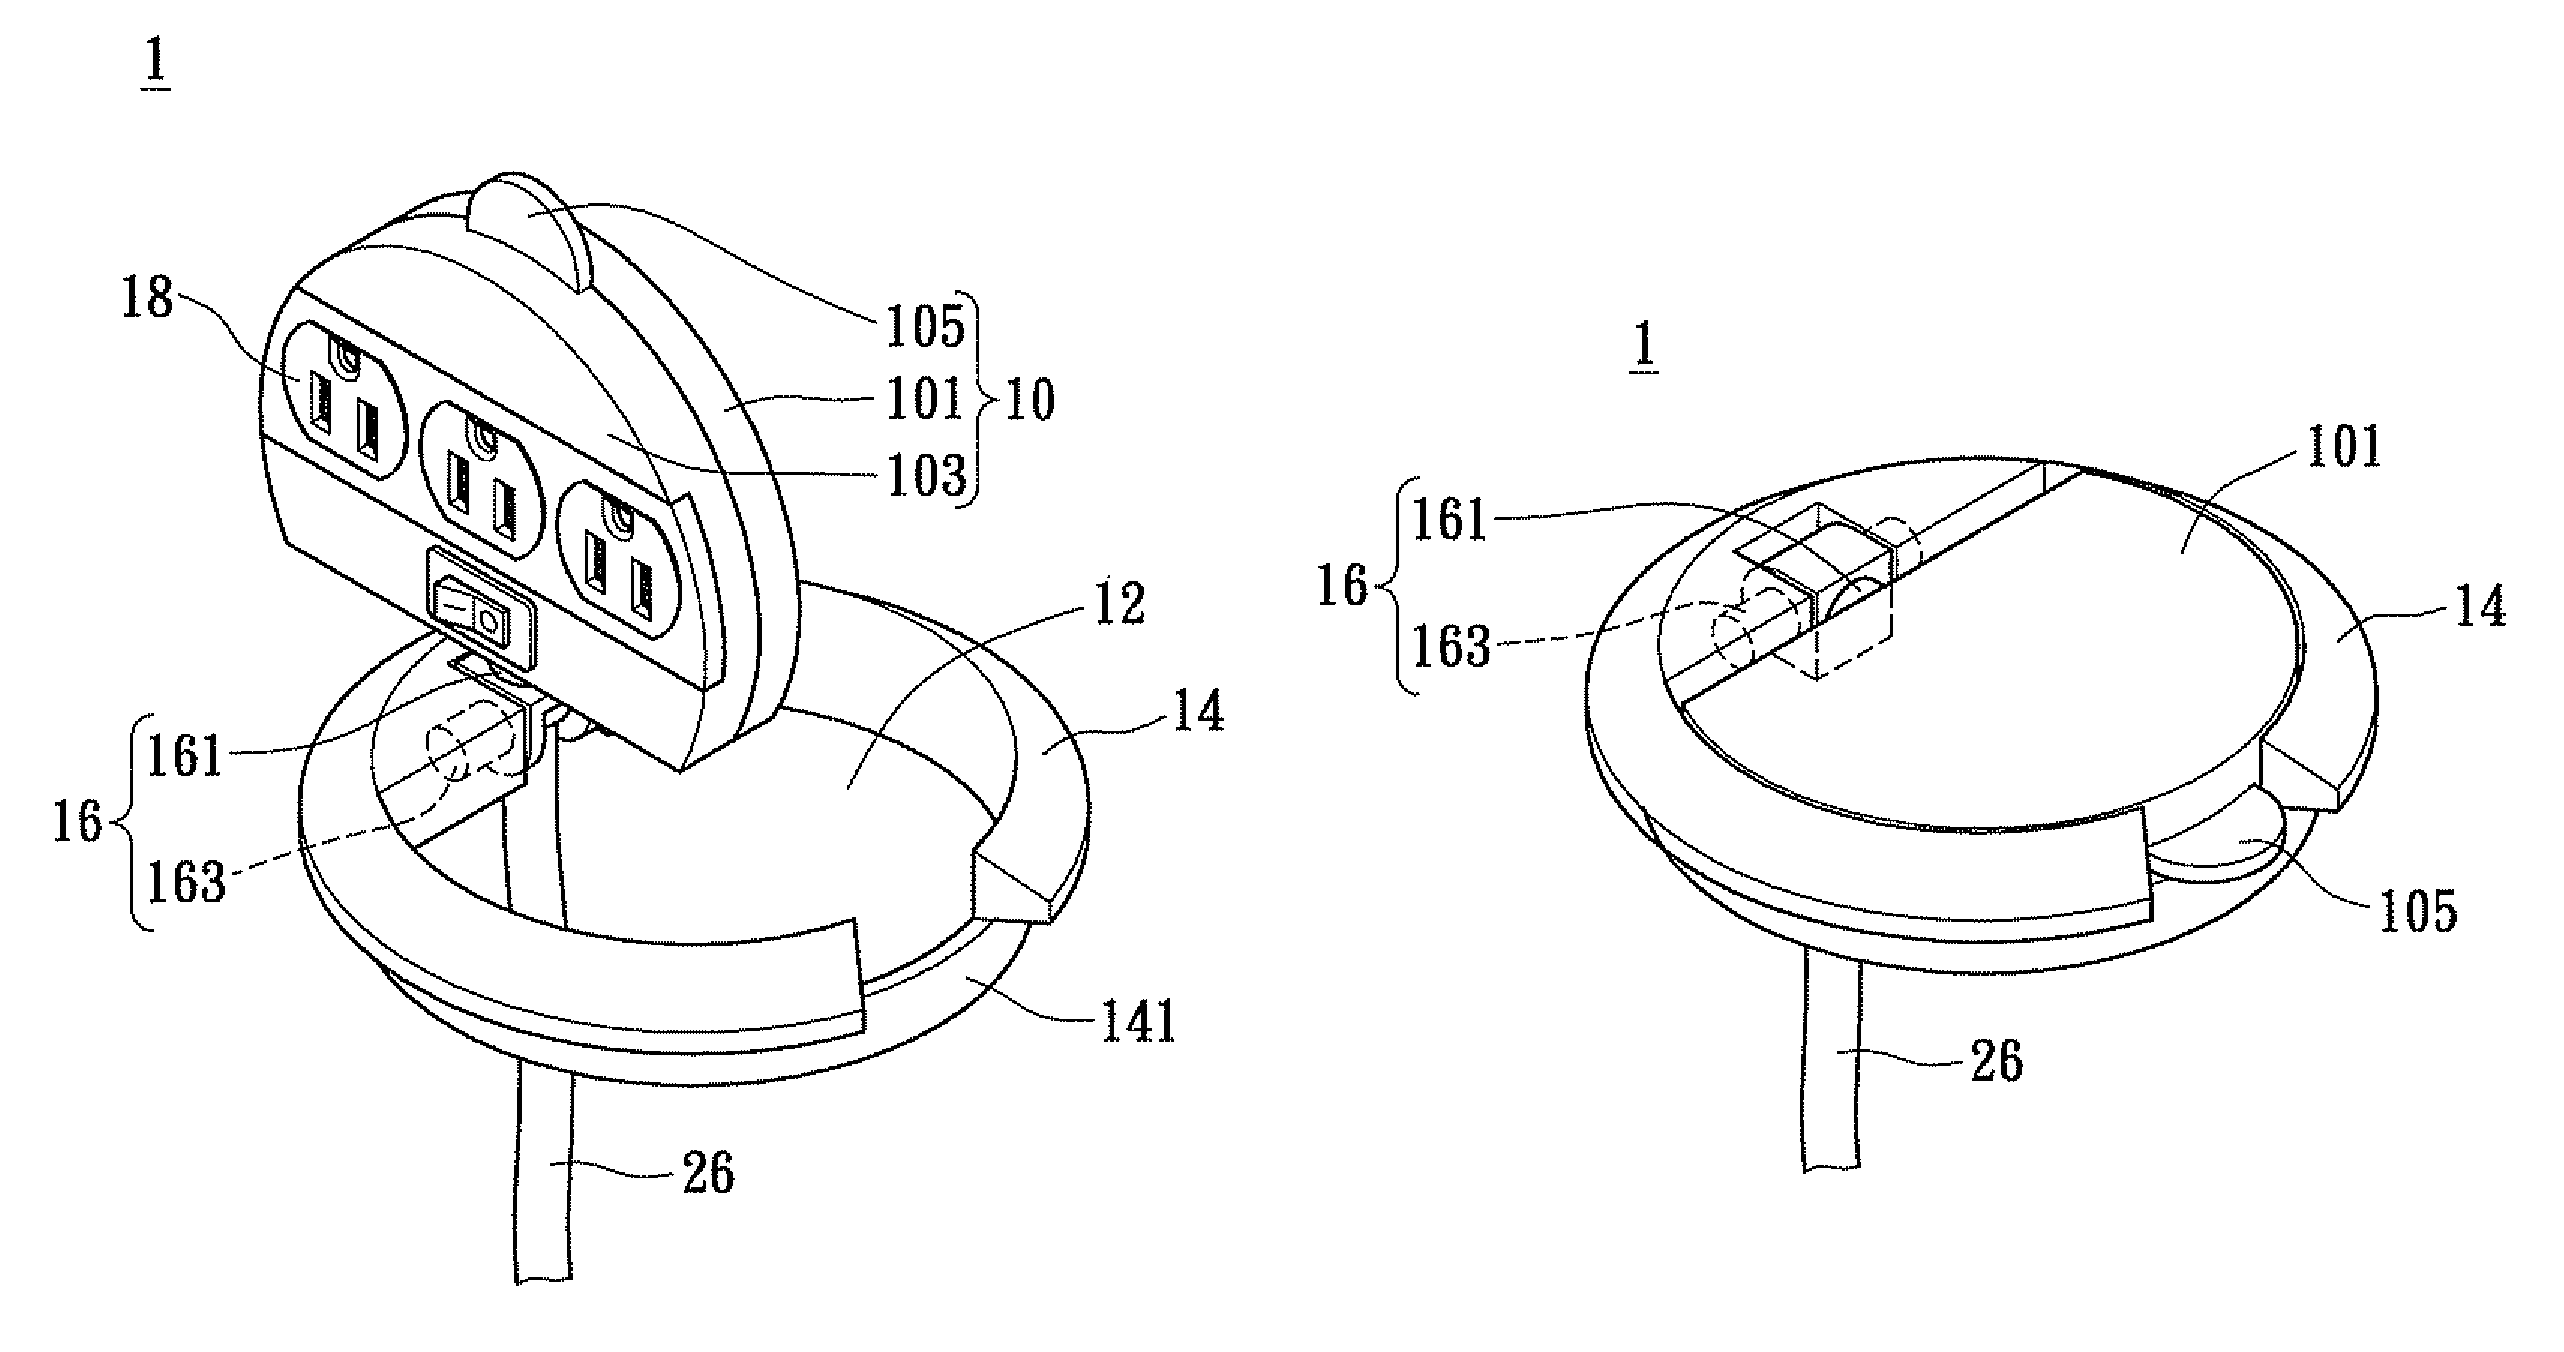 Rotatable and concealable electrical power receptacle